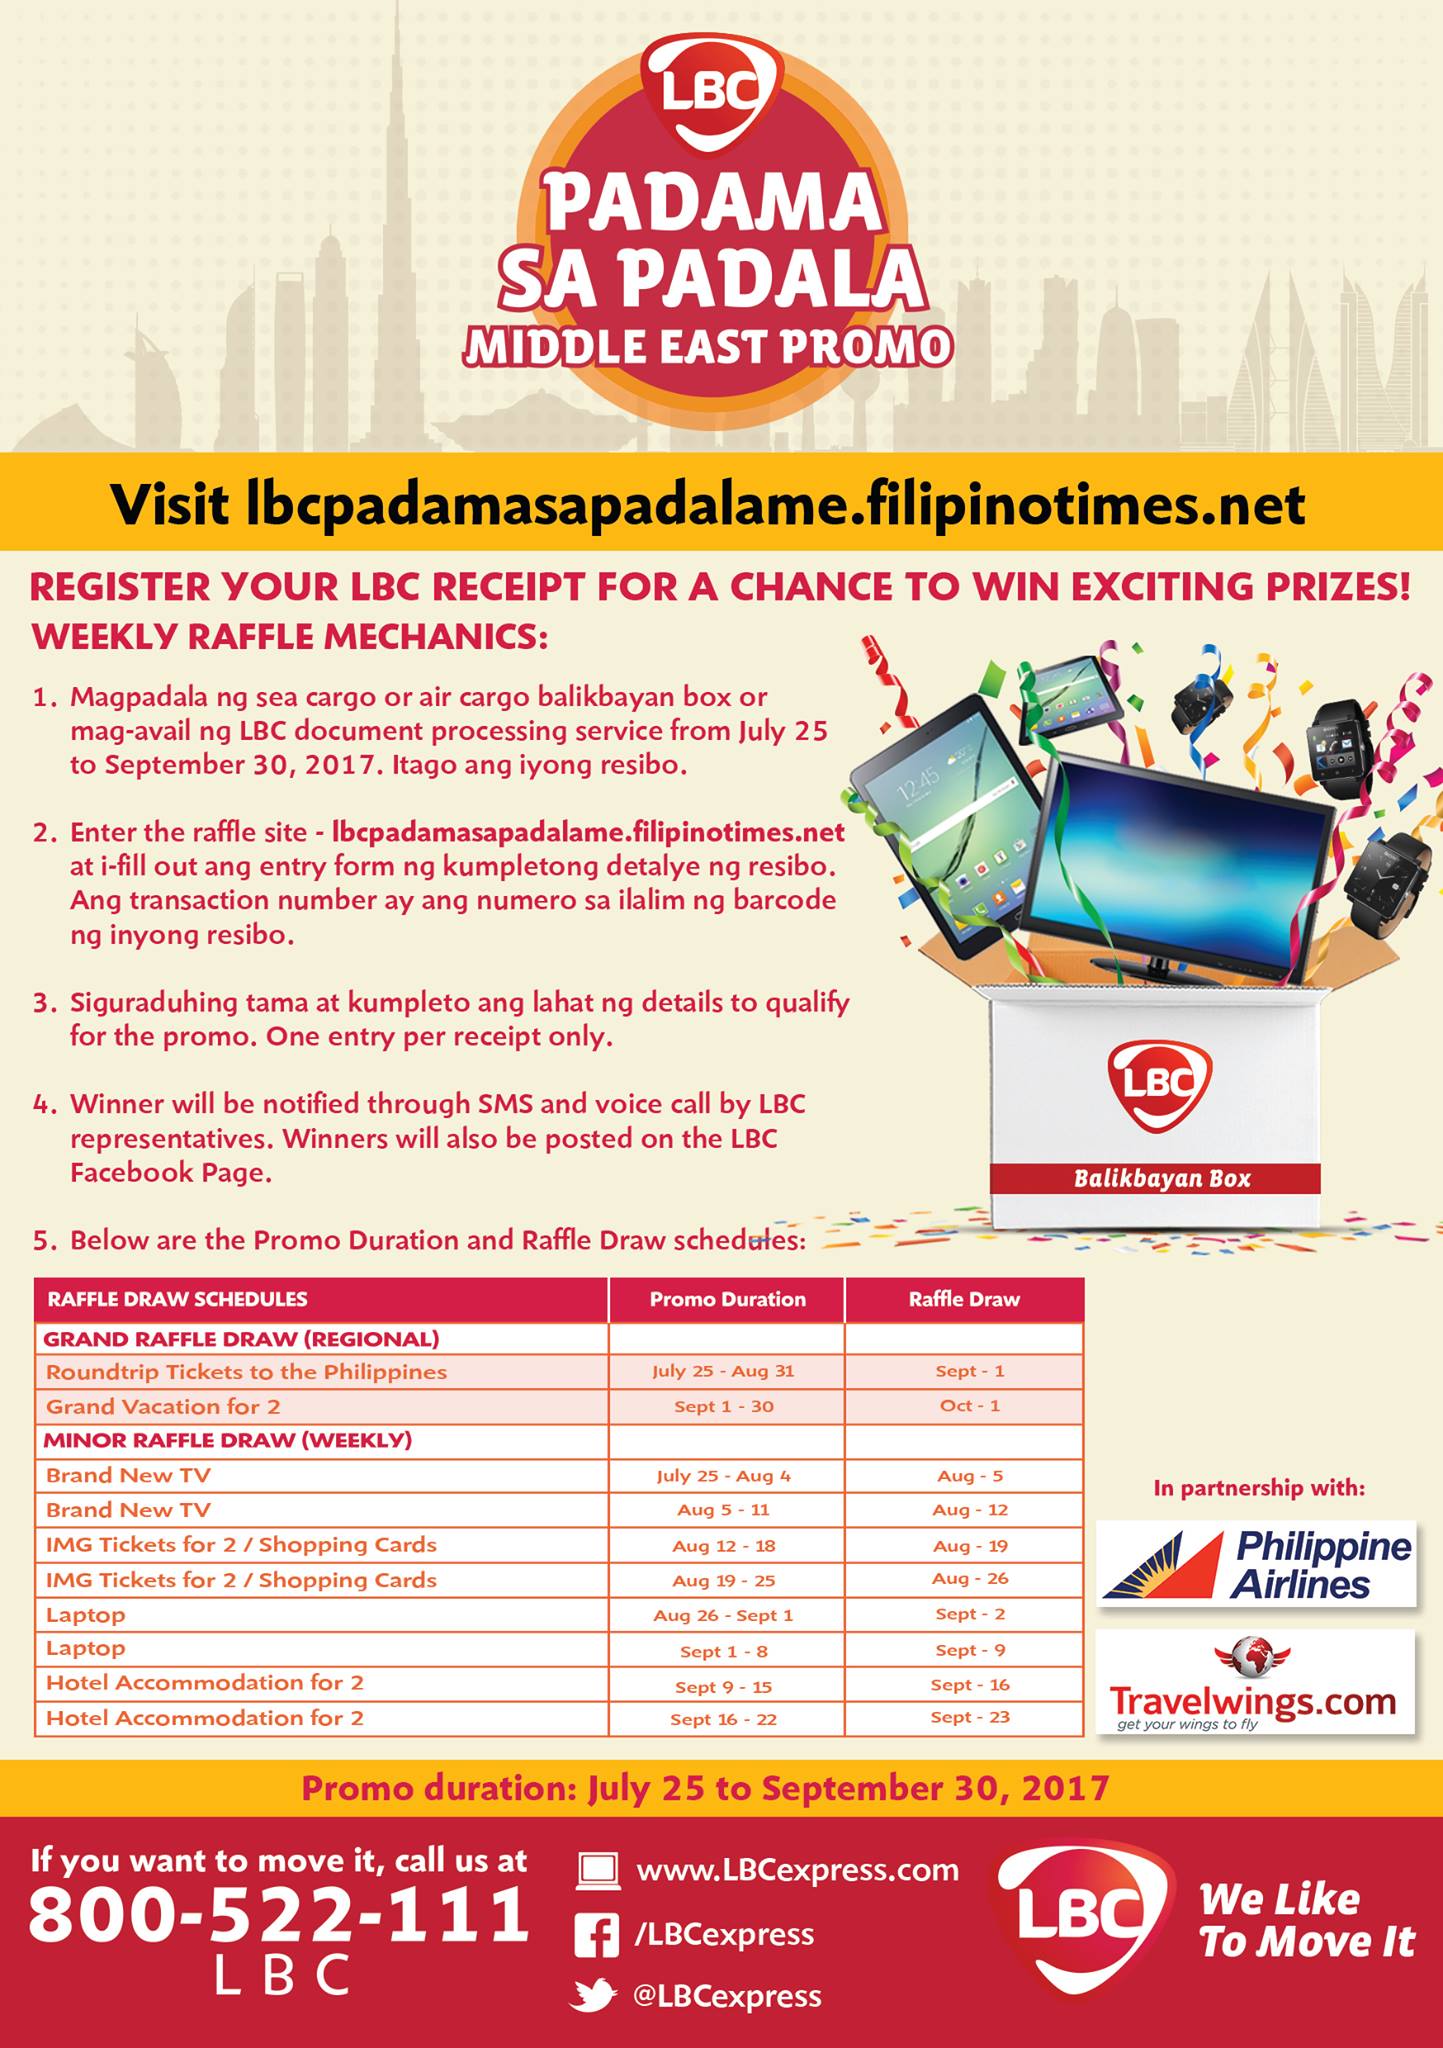 Lbc Launches Padama Sa Padala Middle East Over Dh 250 000 Worth Of Prizes To Be Won The Filipino Times